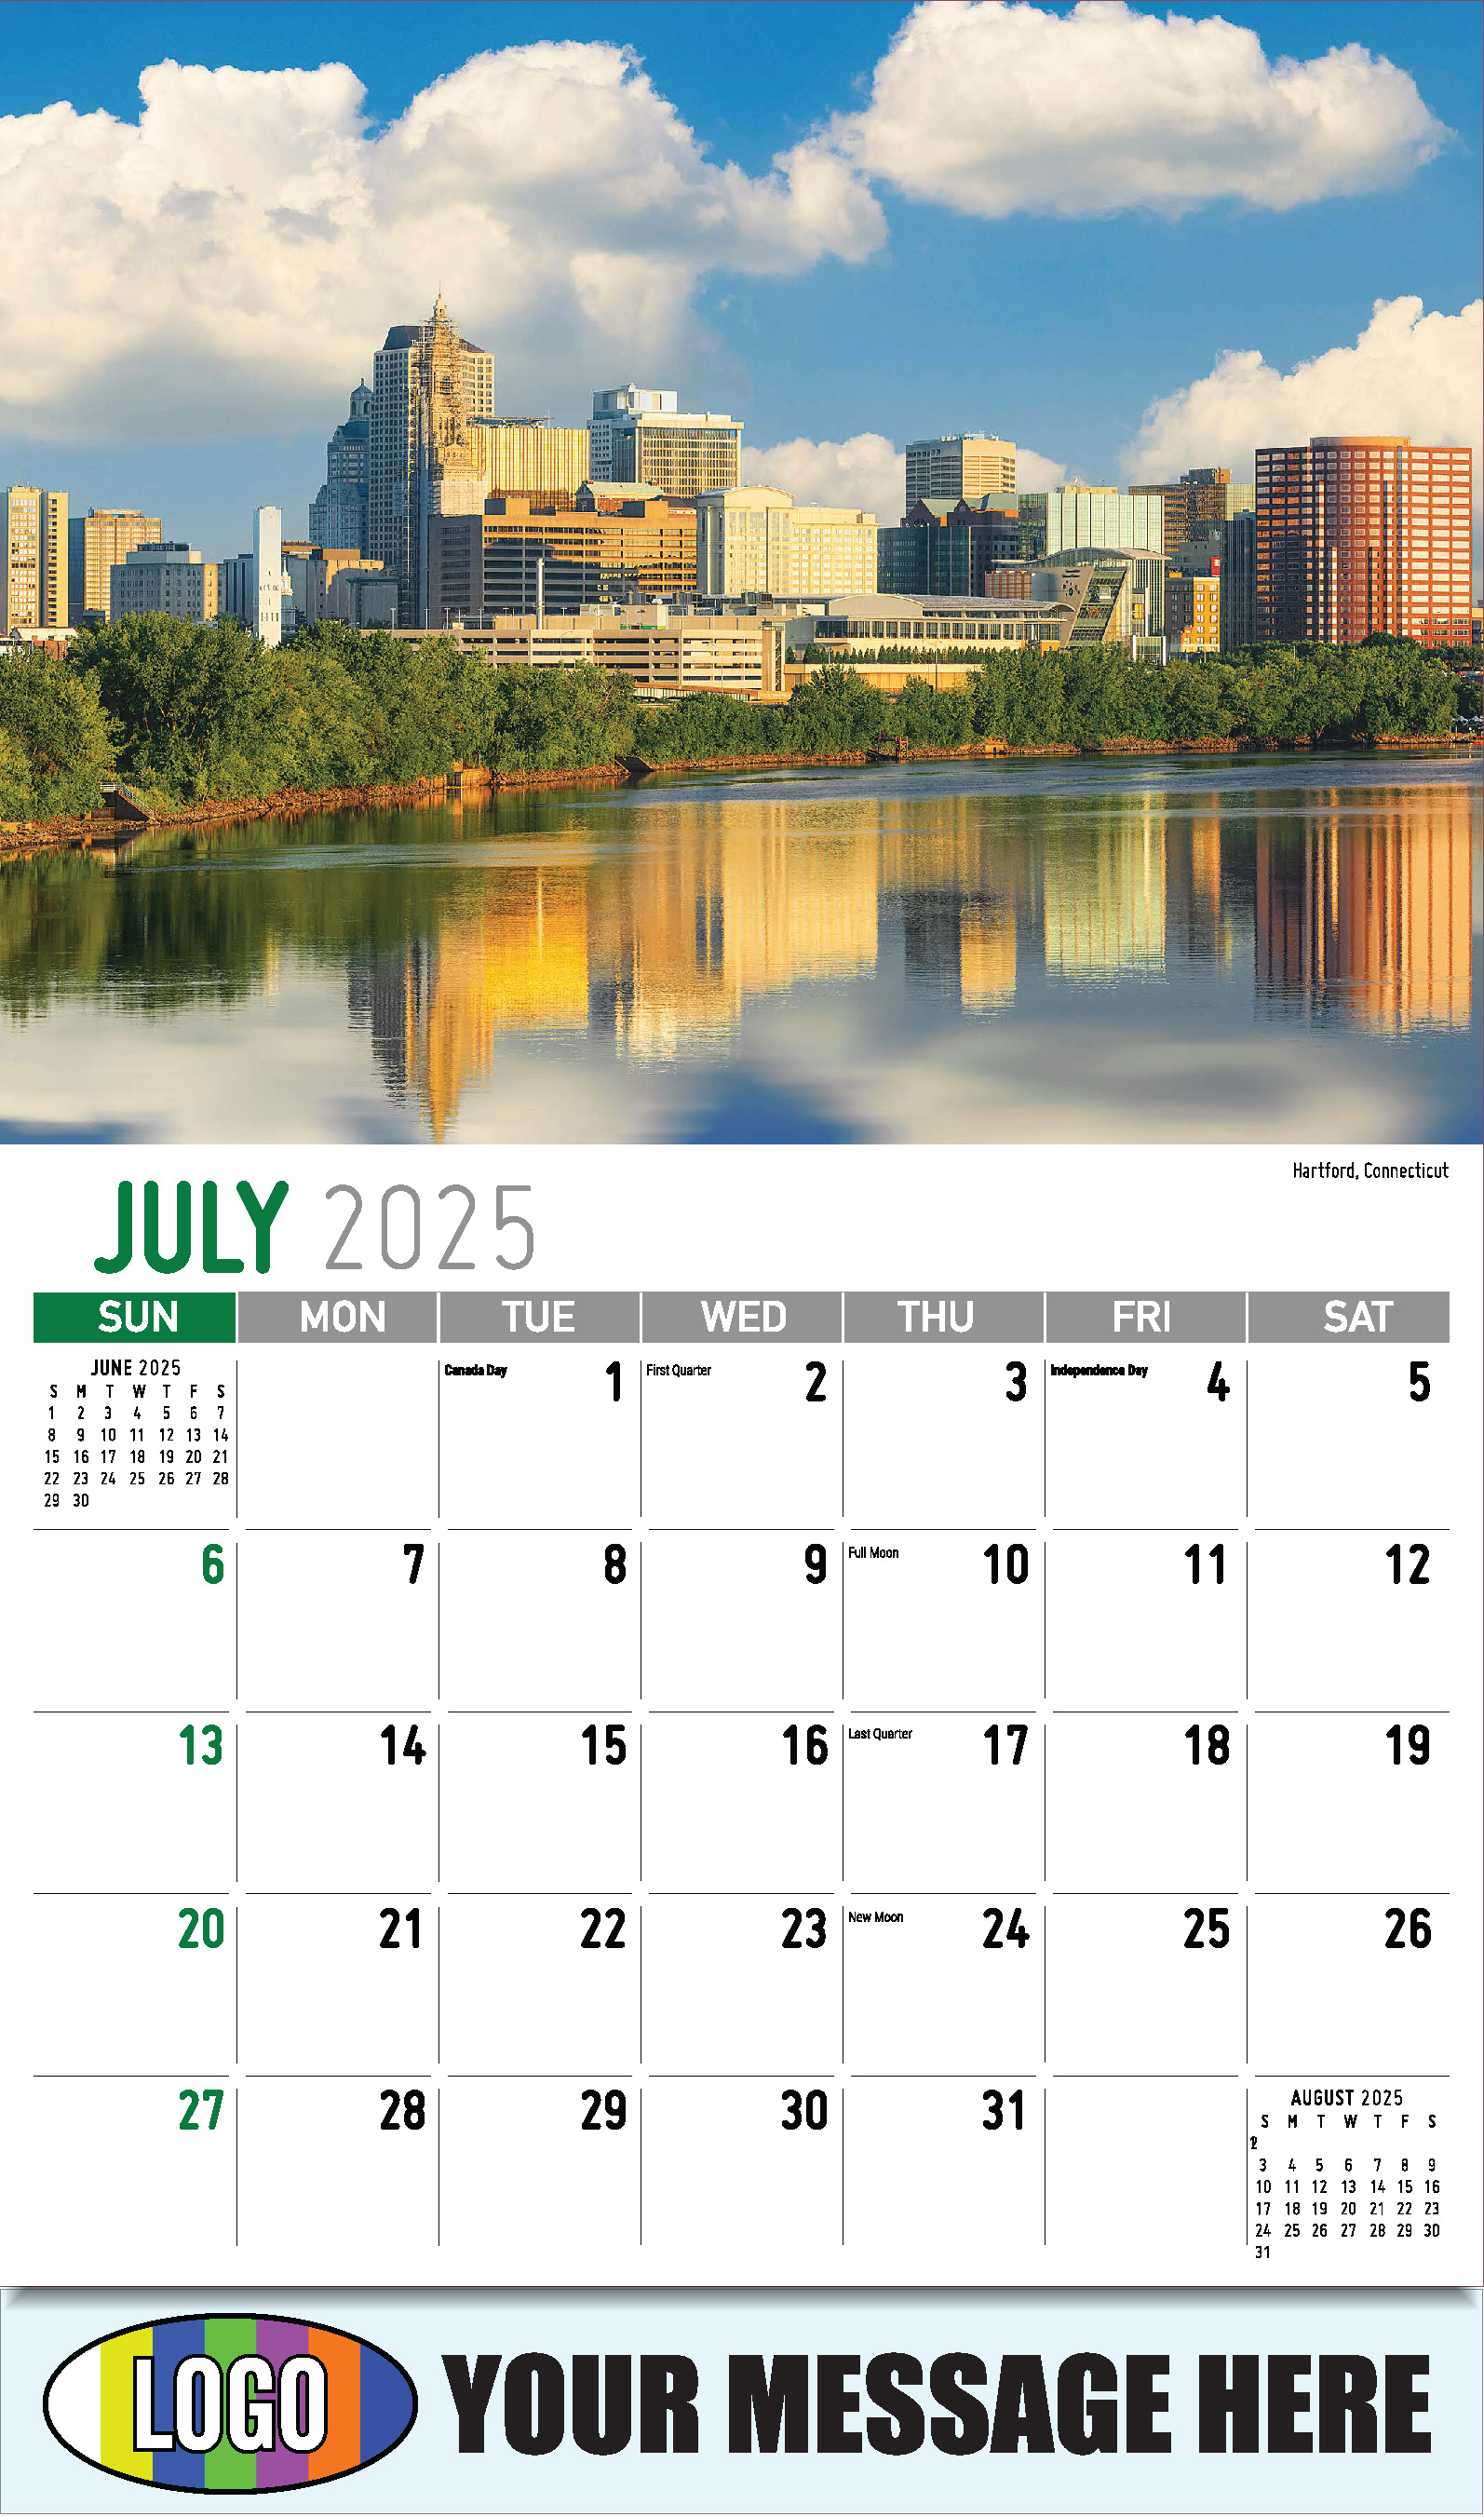 Scenes of New England 2025 Business Advertising Wall Calendar - July